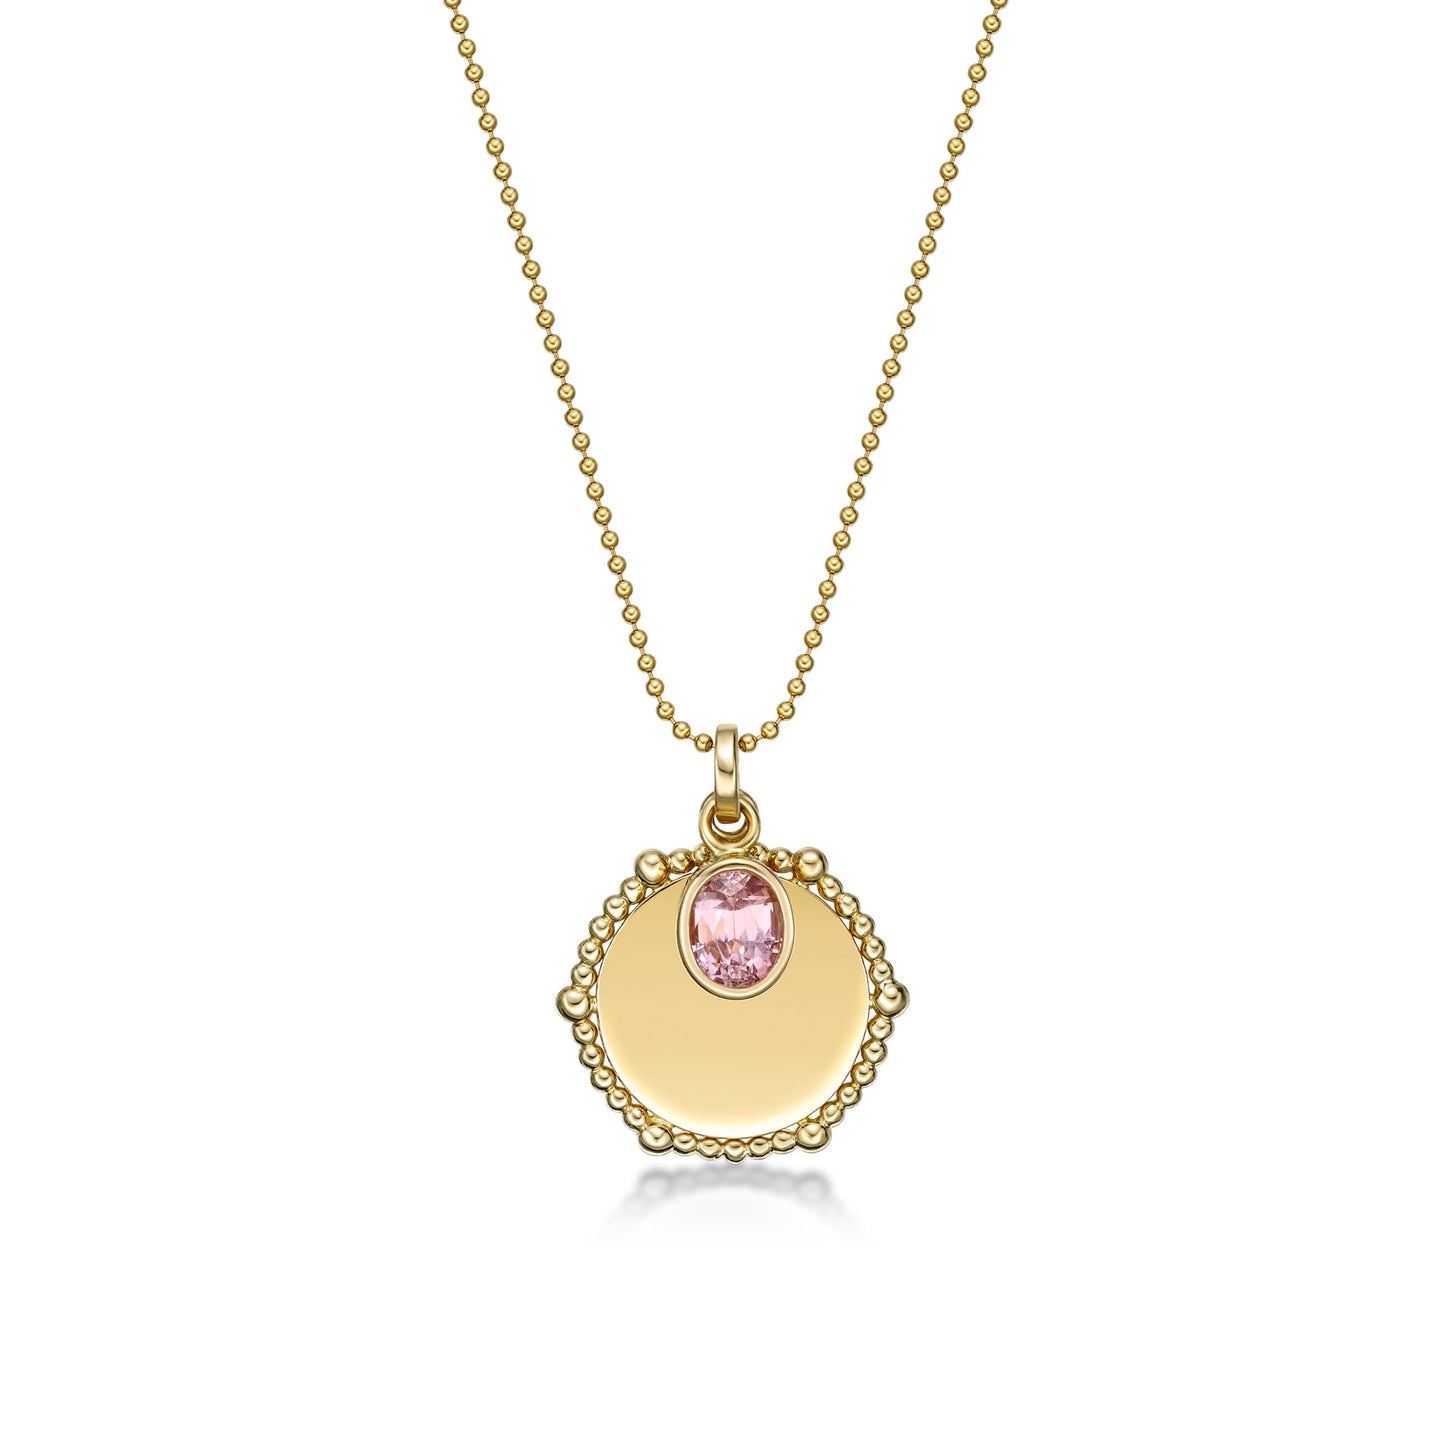 18K Yellow Gold Disc Pendant with custom engraving